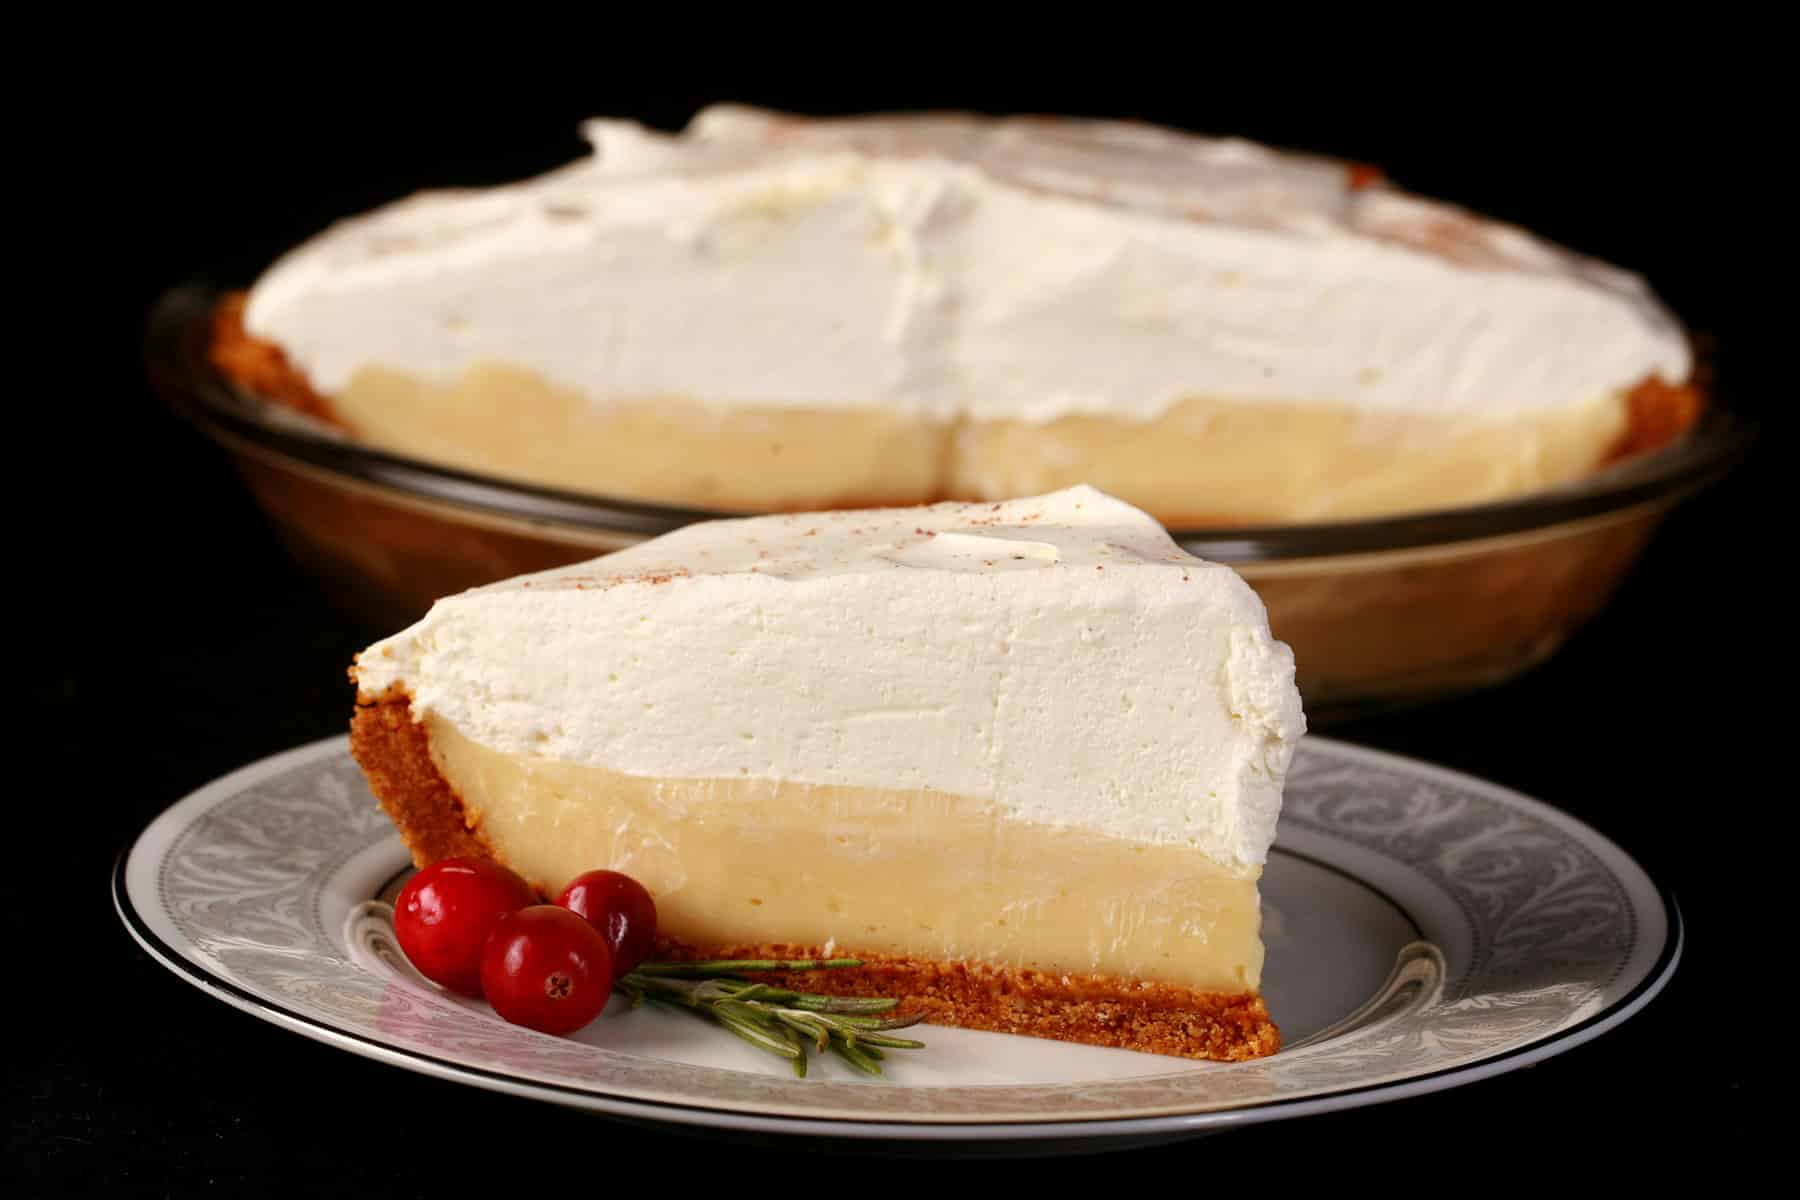 A slice of eggnog cream pie, with the rest of the pie behind it.